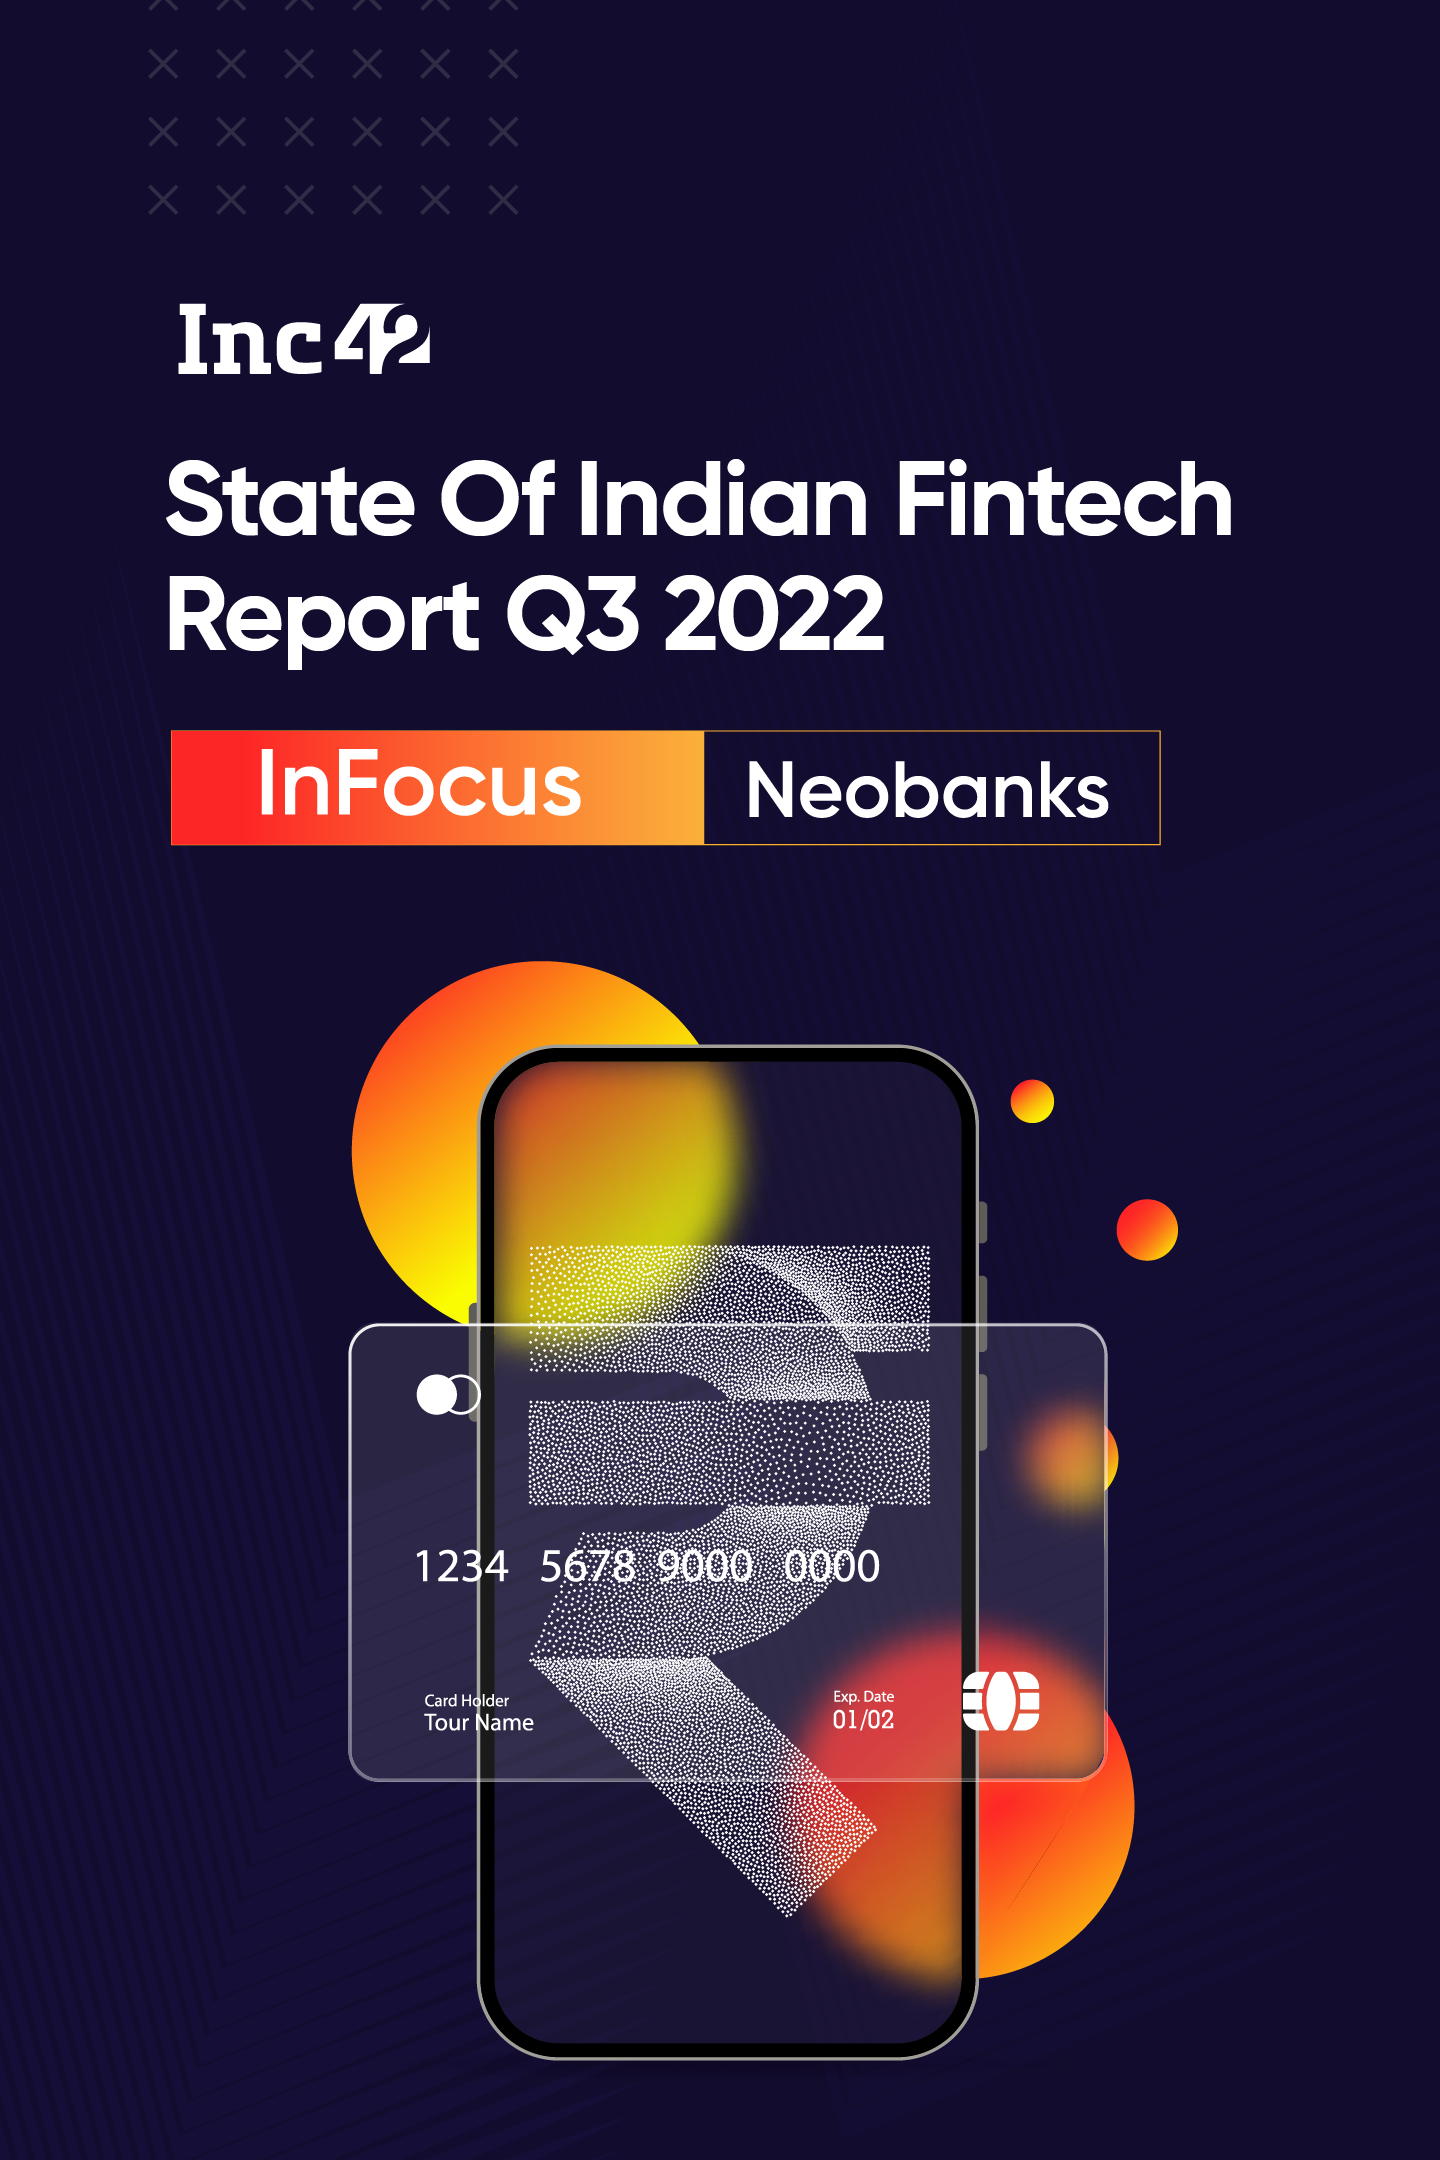 State Of Indian Fintech Report, Q3 2022